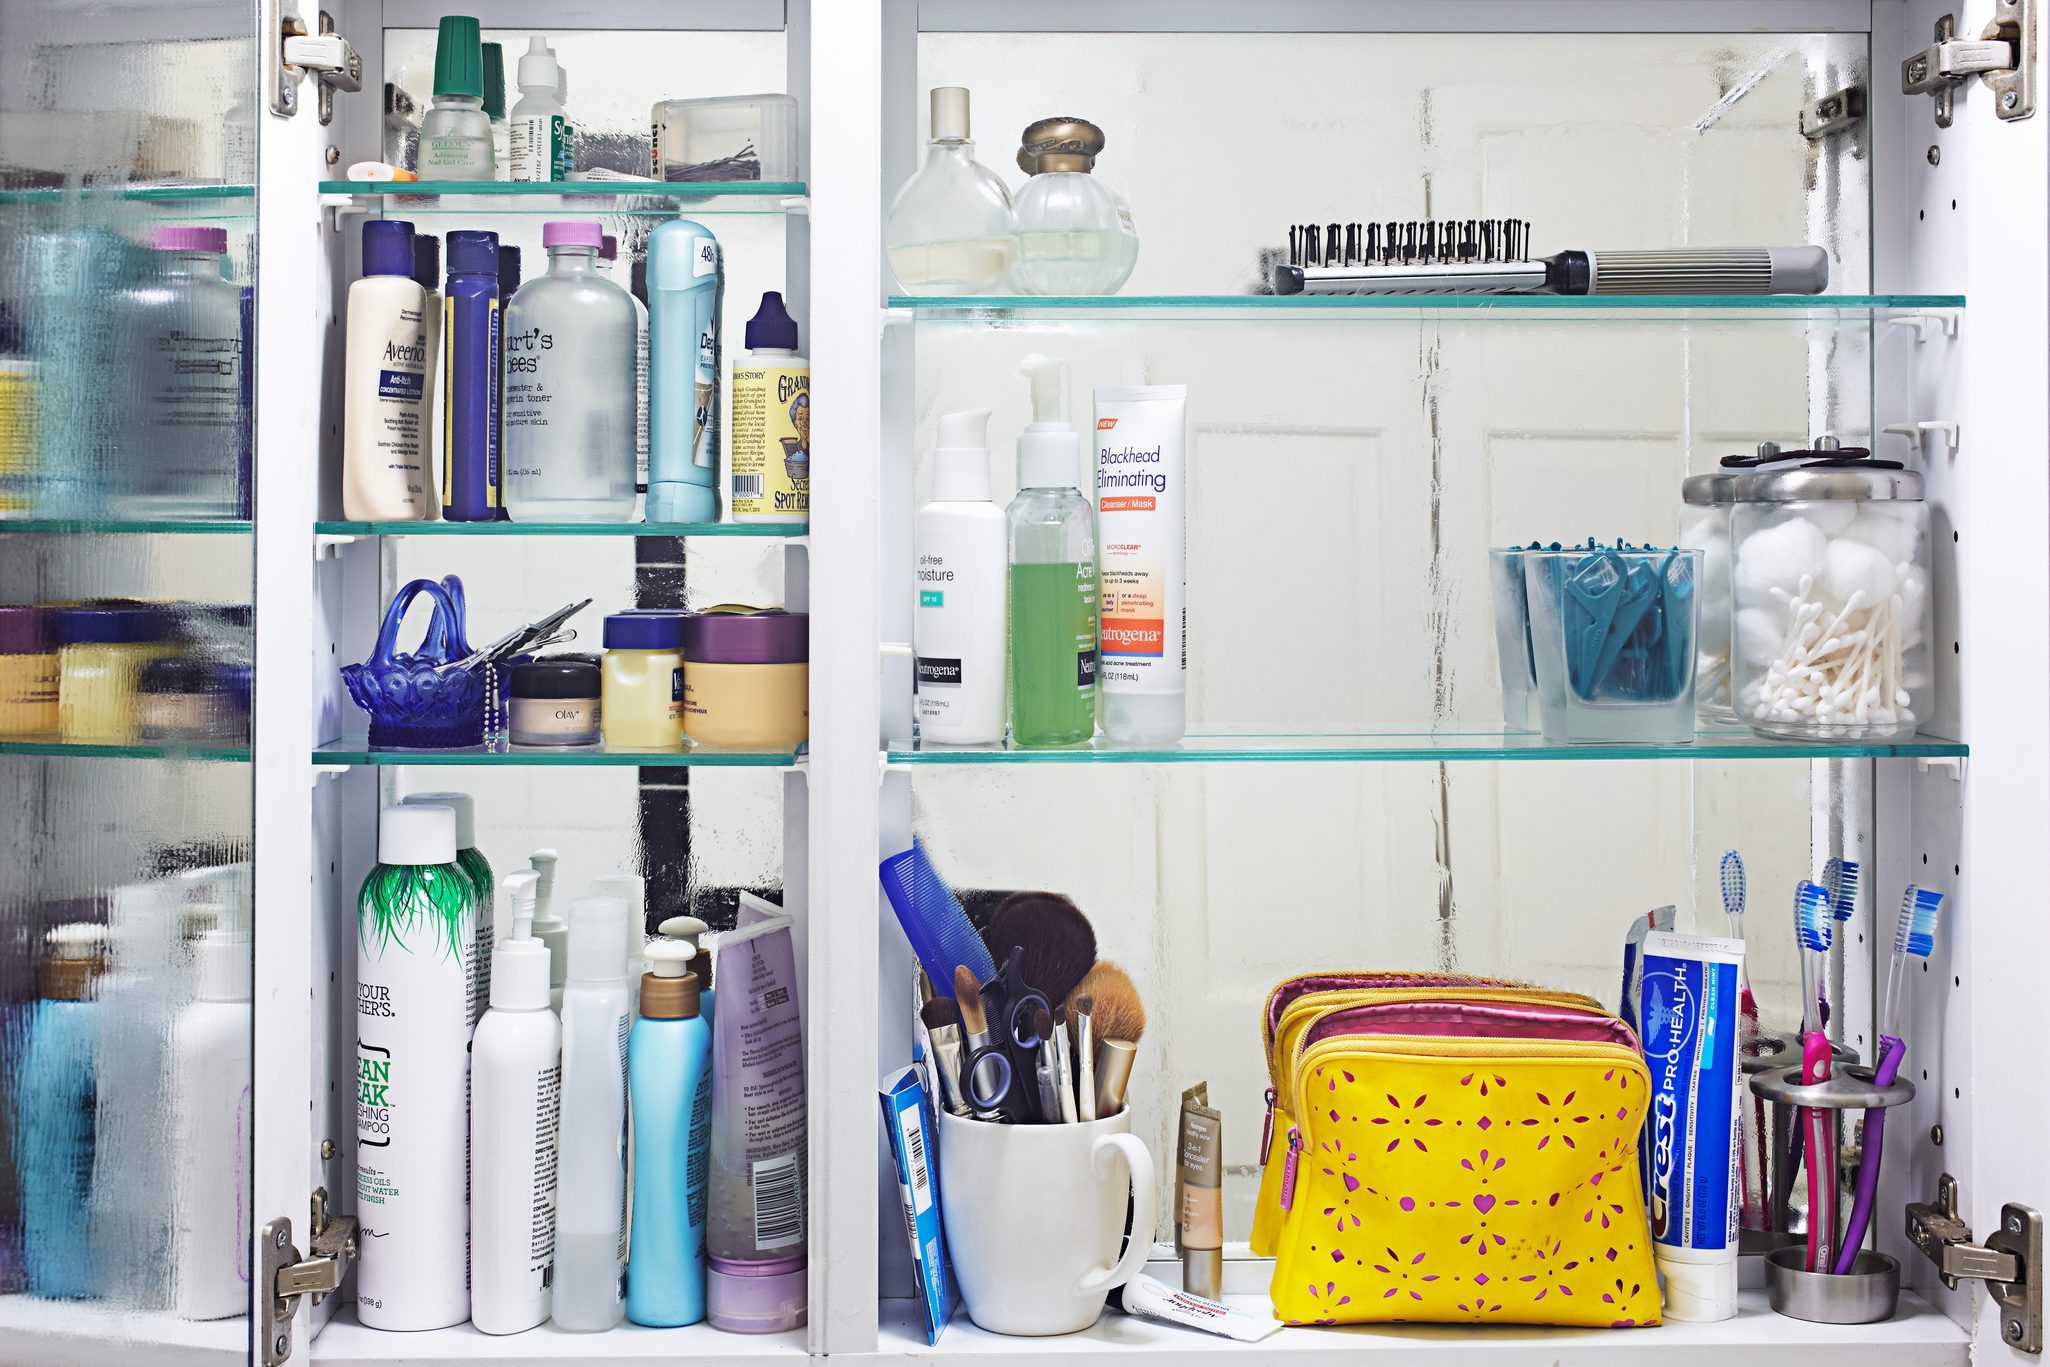 4 Easy Steps to Organizing a Medicine Cabinet - Moving Insider